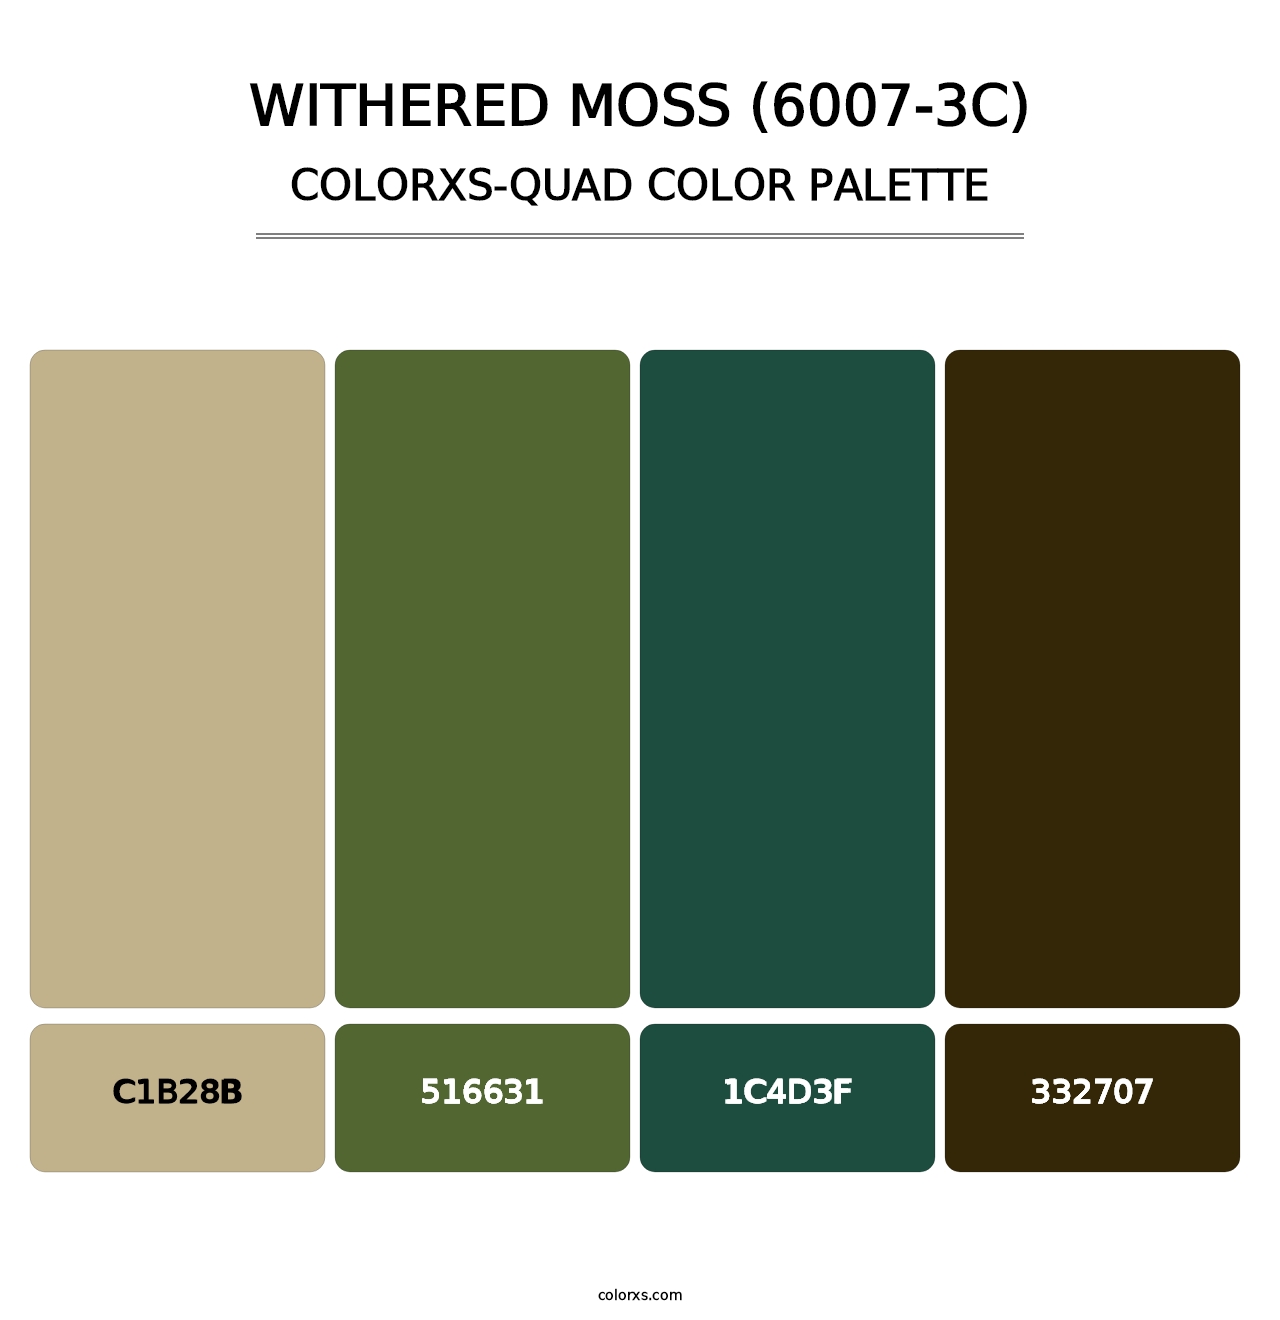 Withered Moss (6007-3C) - Colorxs Quad Palette